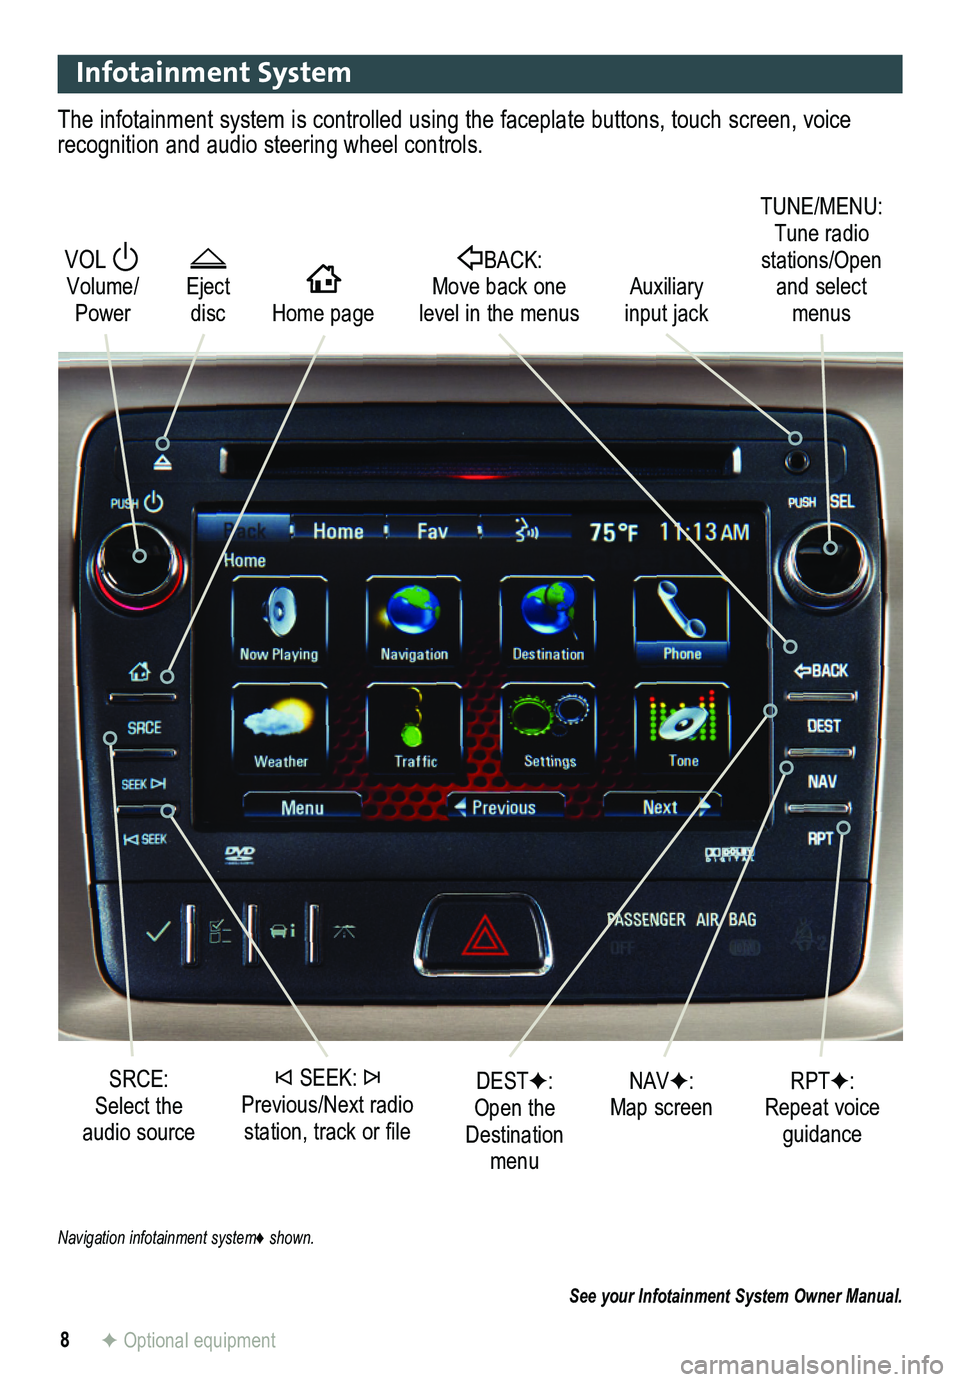 GMC ACADIA 2013  Get To Know Guide 8
Infotainment System
The infotainment system is controlled using the faceplate buttons, touch screen, voice recognition and audio steering wheel controls.
See your Infotainment System Owner Manual.
V